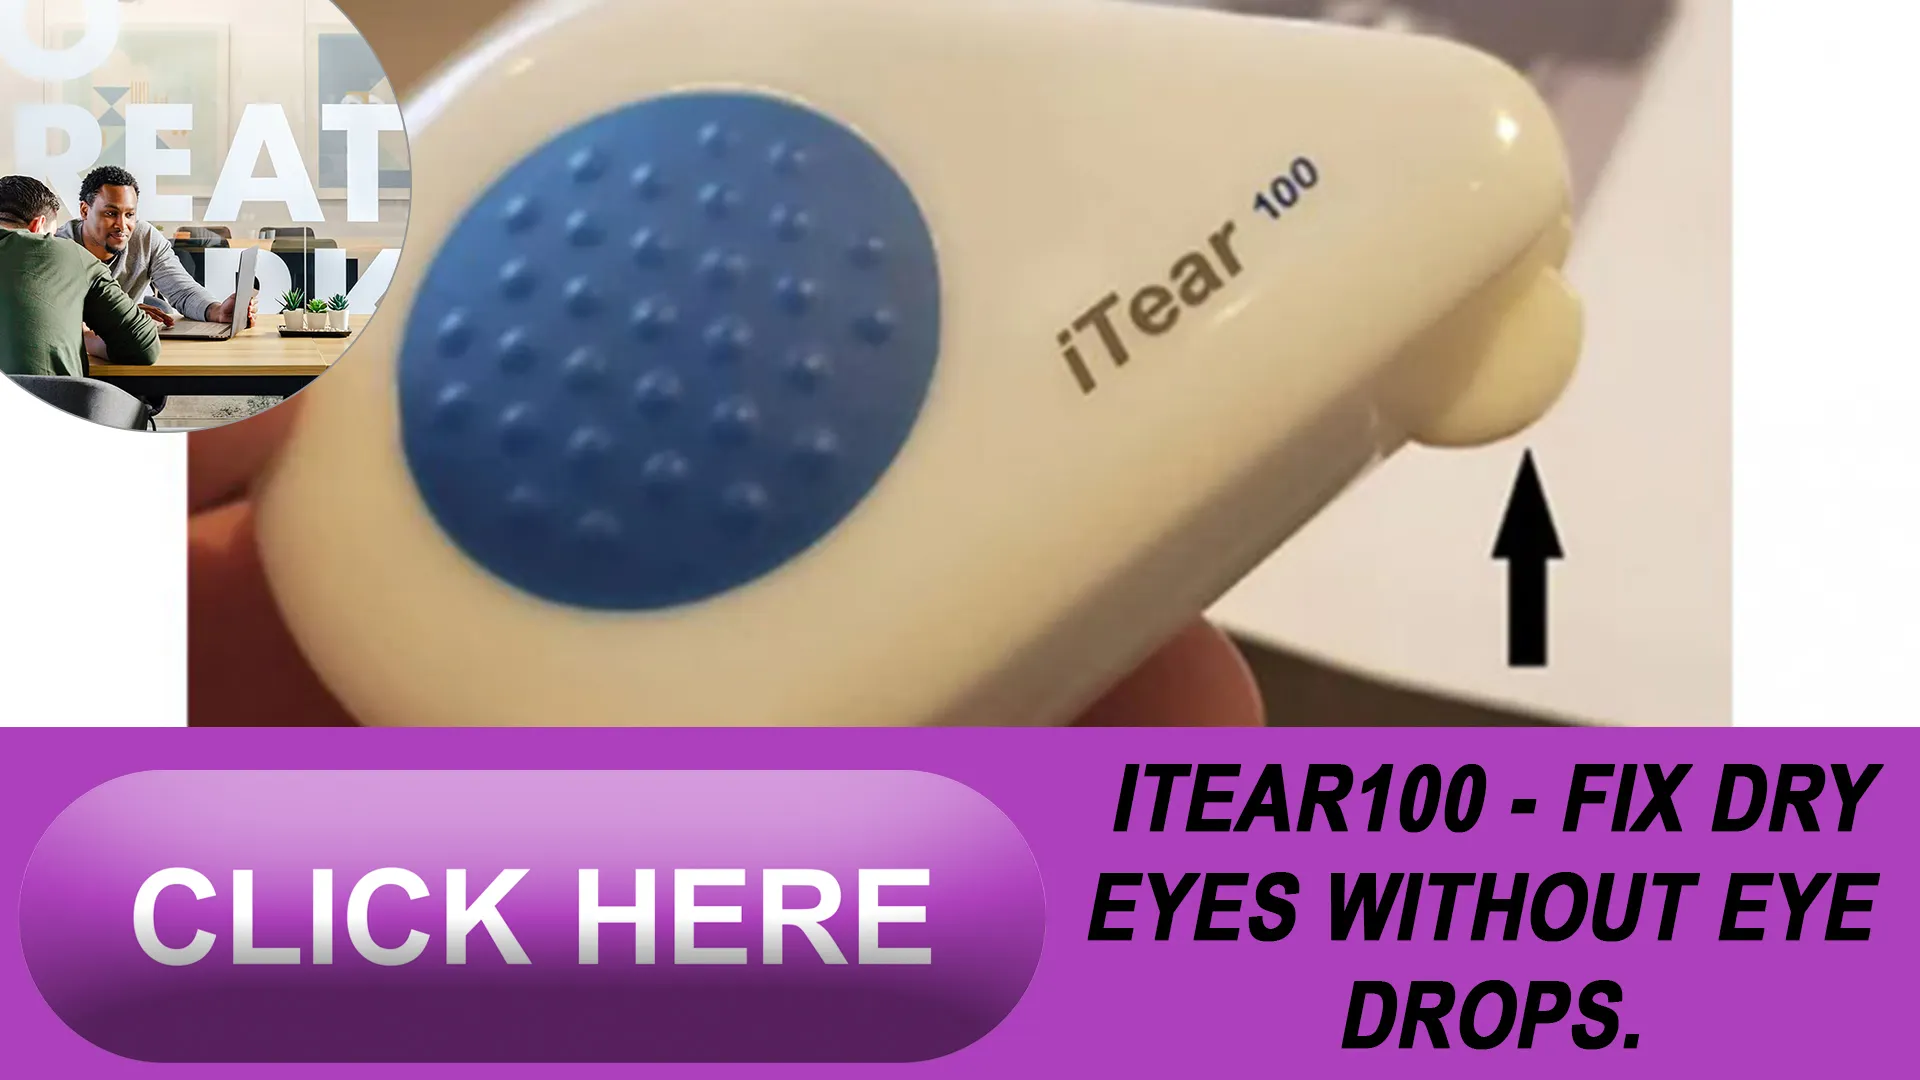 Why Opt for iTEAR100?